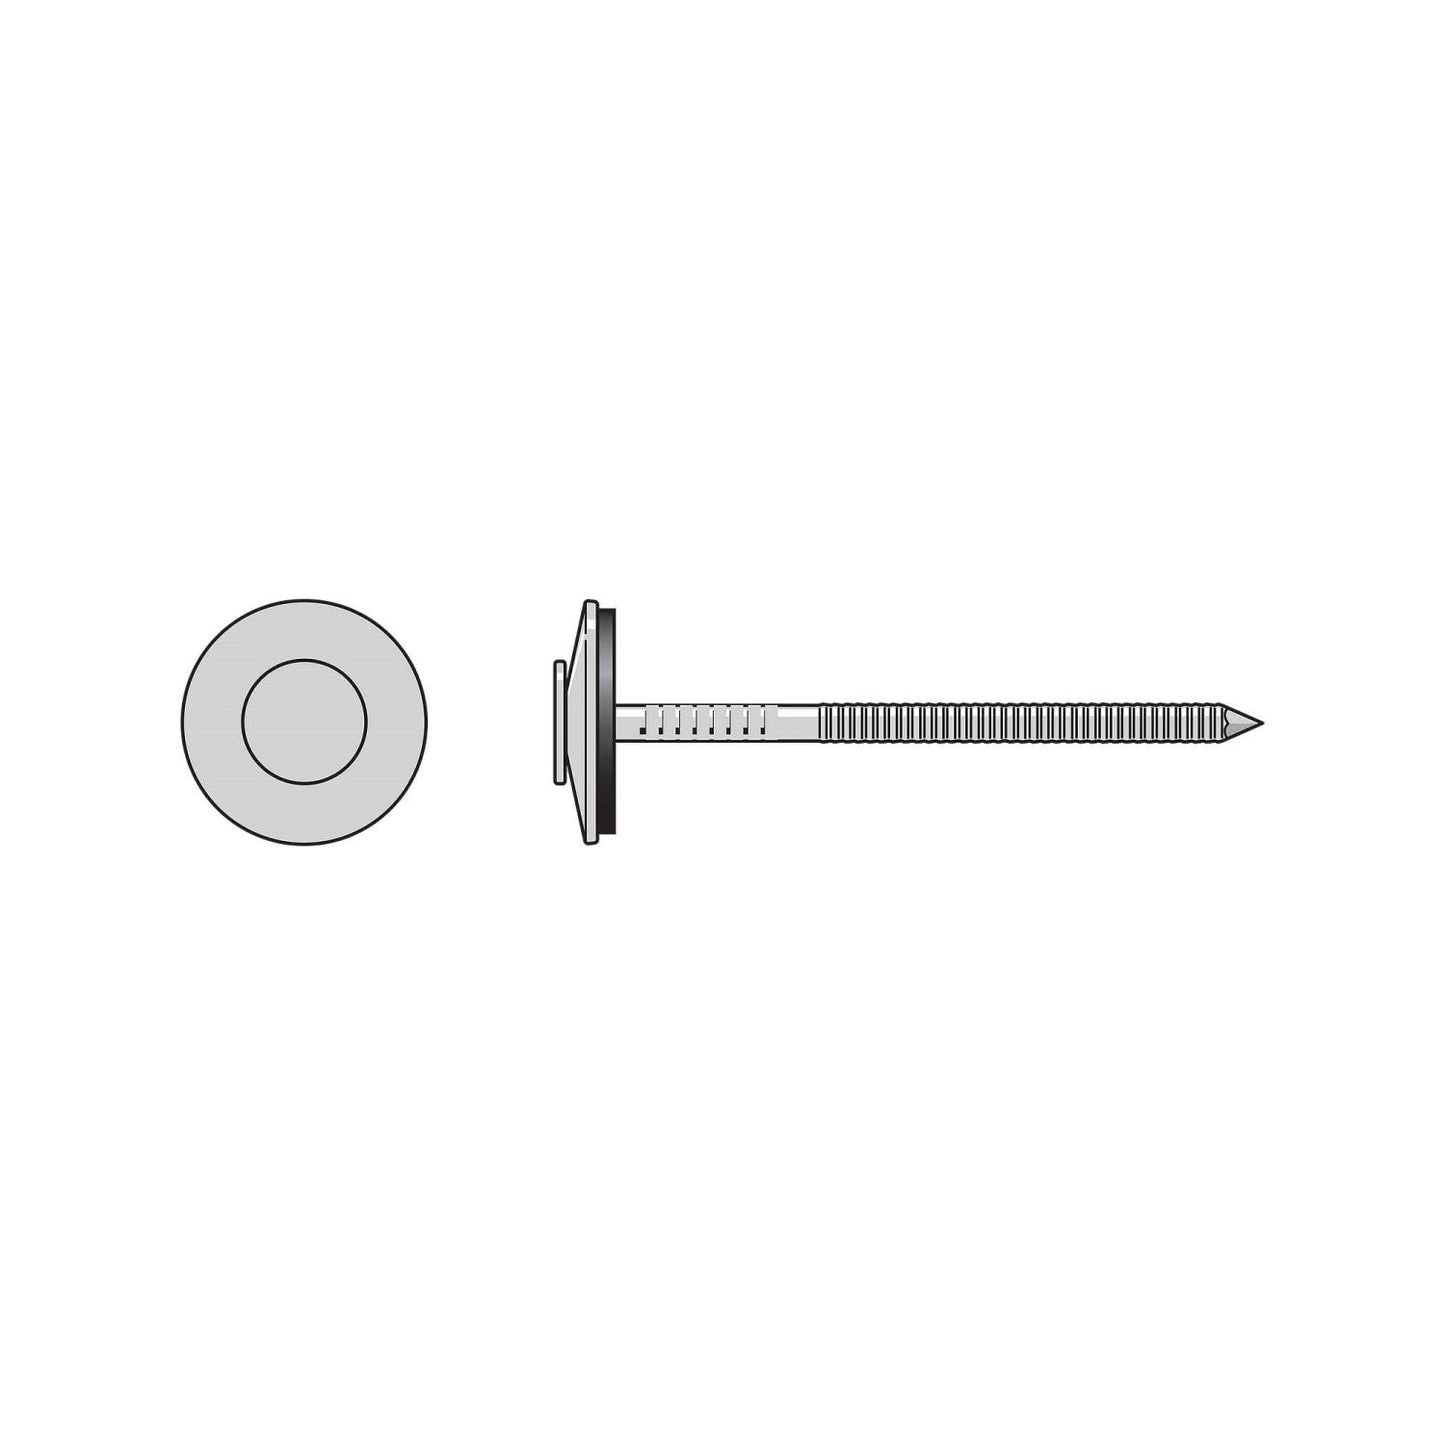 Nail with EPDM Washer - 316 Stainless Steel